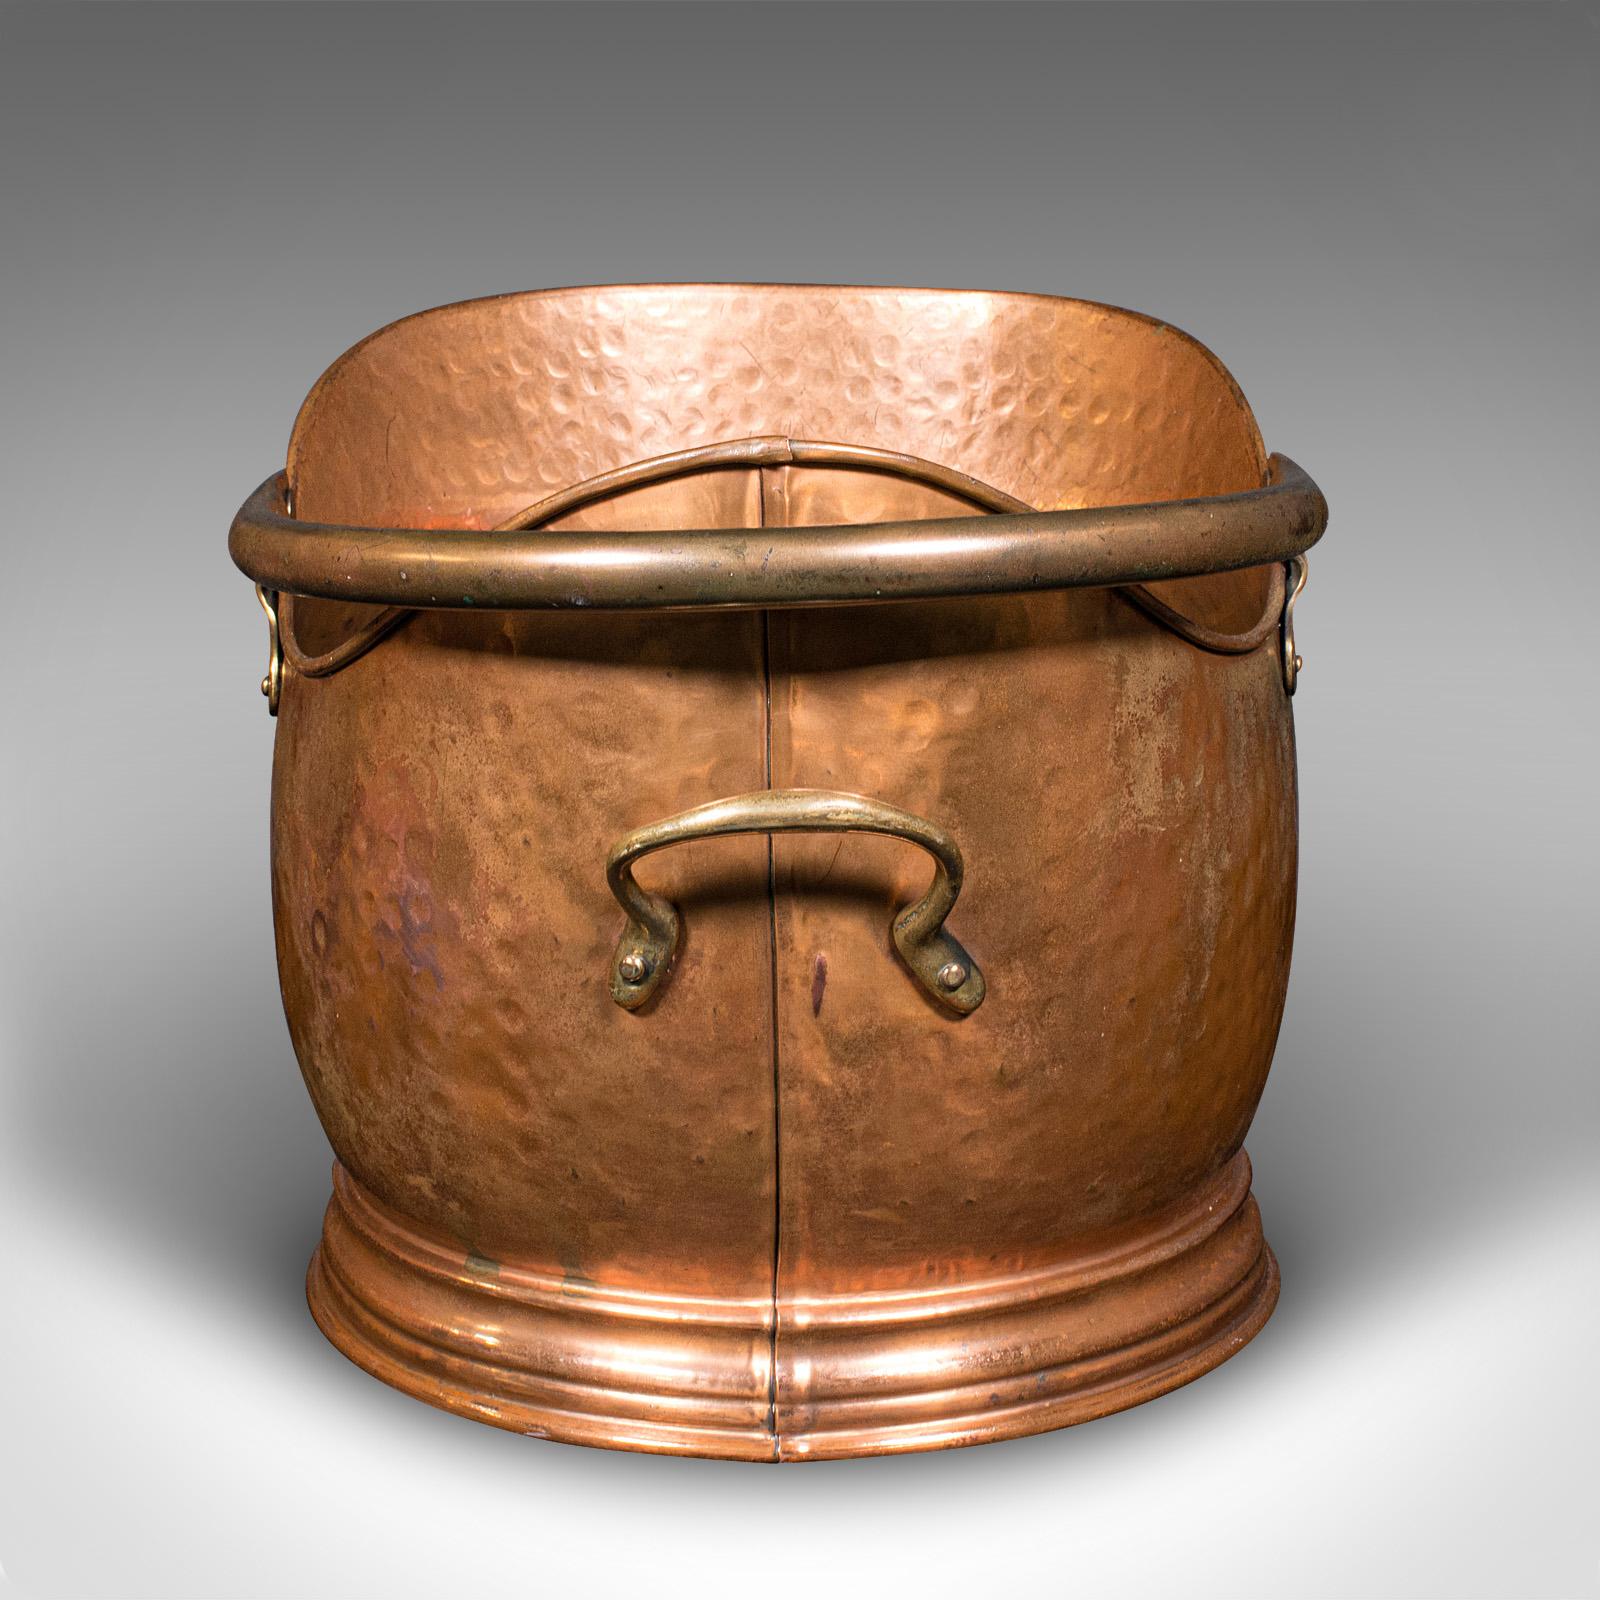 British Antique Helmet Coal Scuttle, English, Copper, Fireside, Fuel Keeper, Victorian For Sale